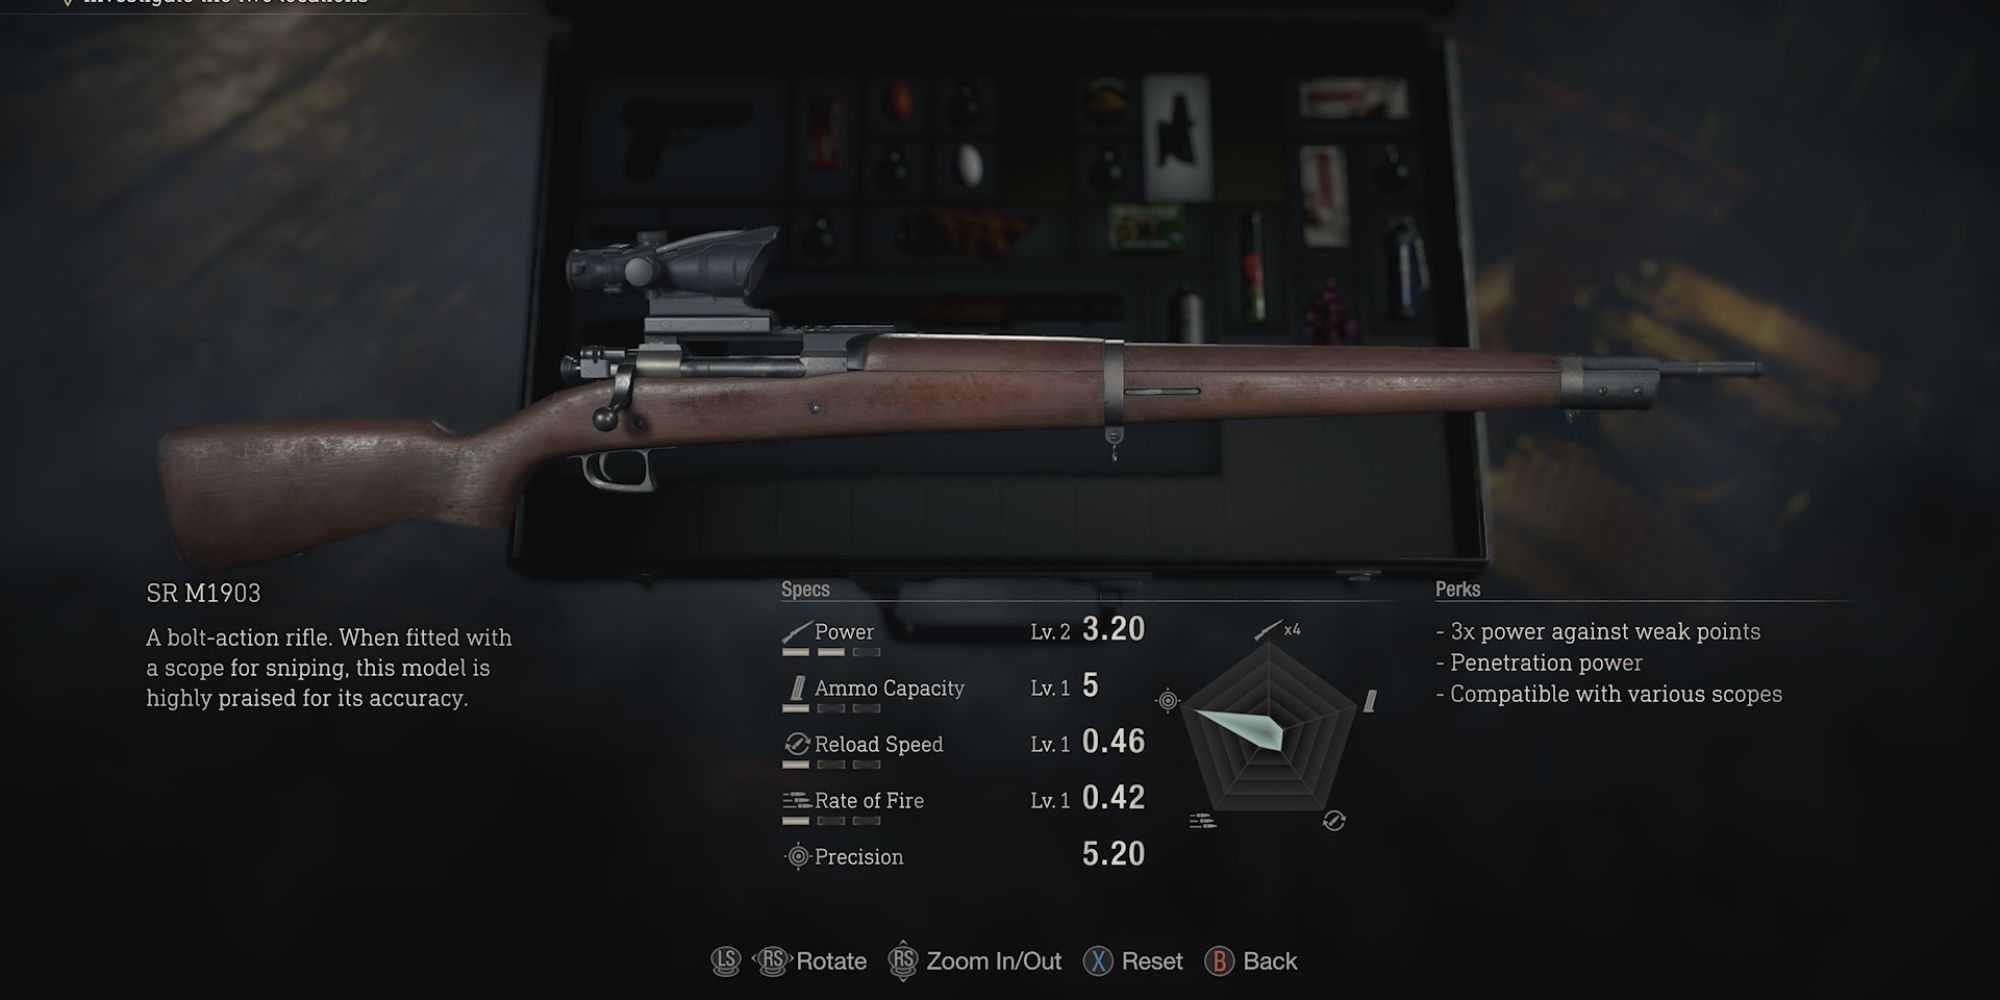 Capcom third person shooter re4 remake sniper rifle 1903 long weapon